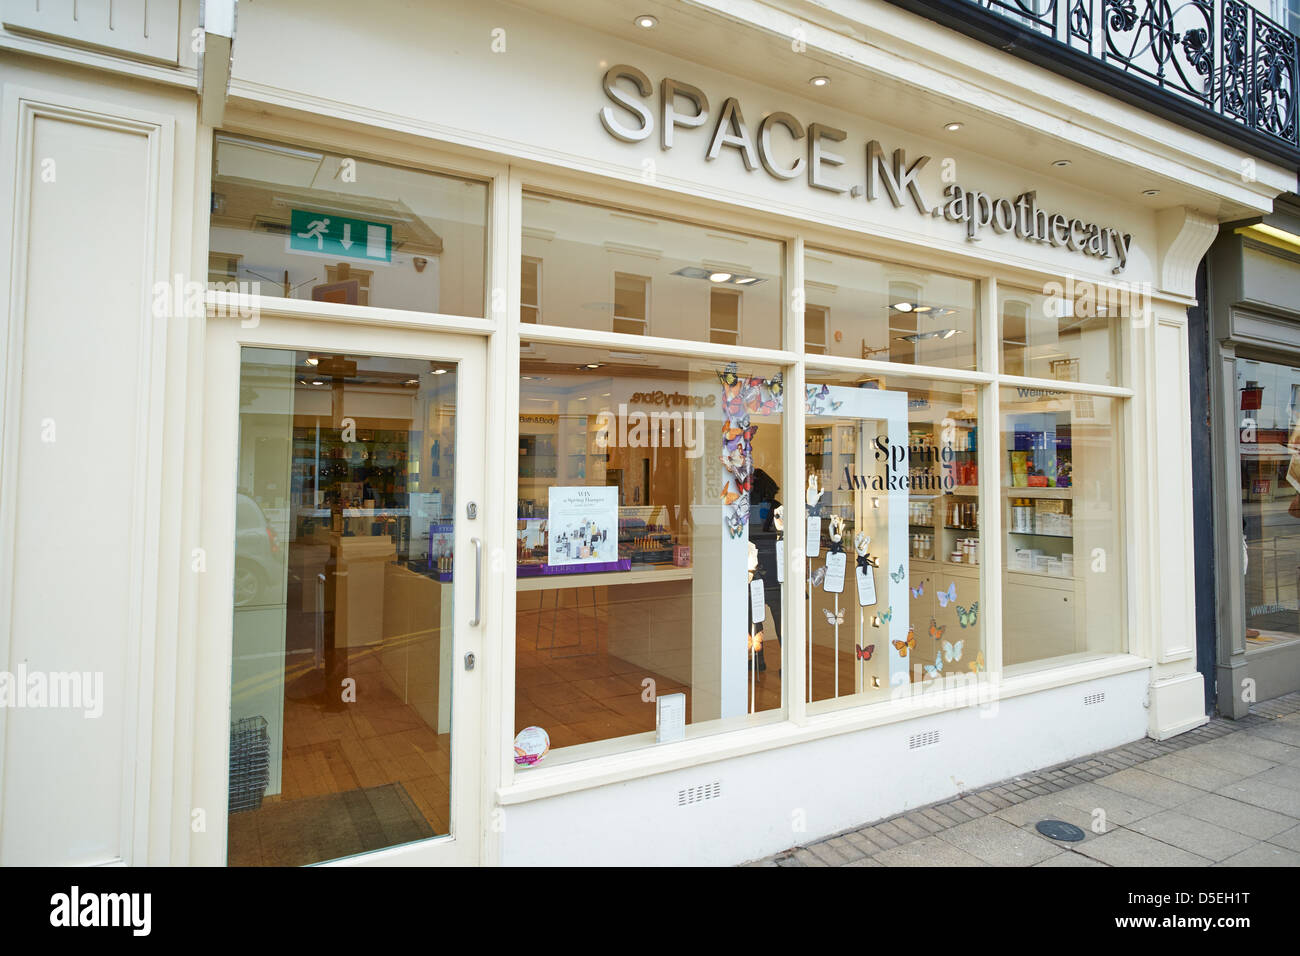 Space NK Apothecary Regent Street Leamington Spa Warwickshire UK Banque D'Images